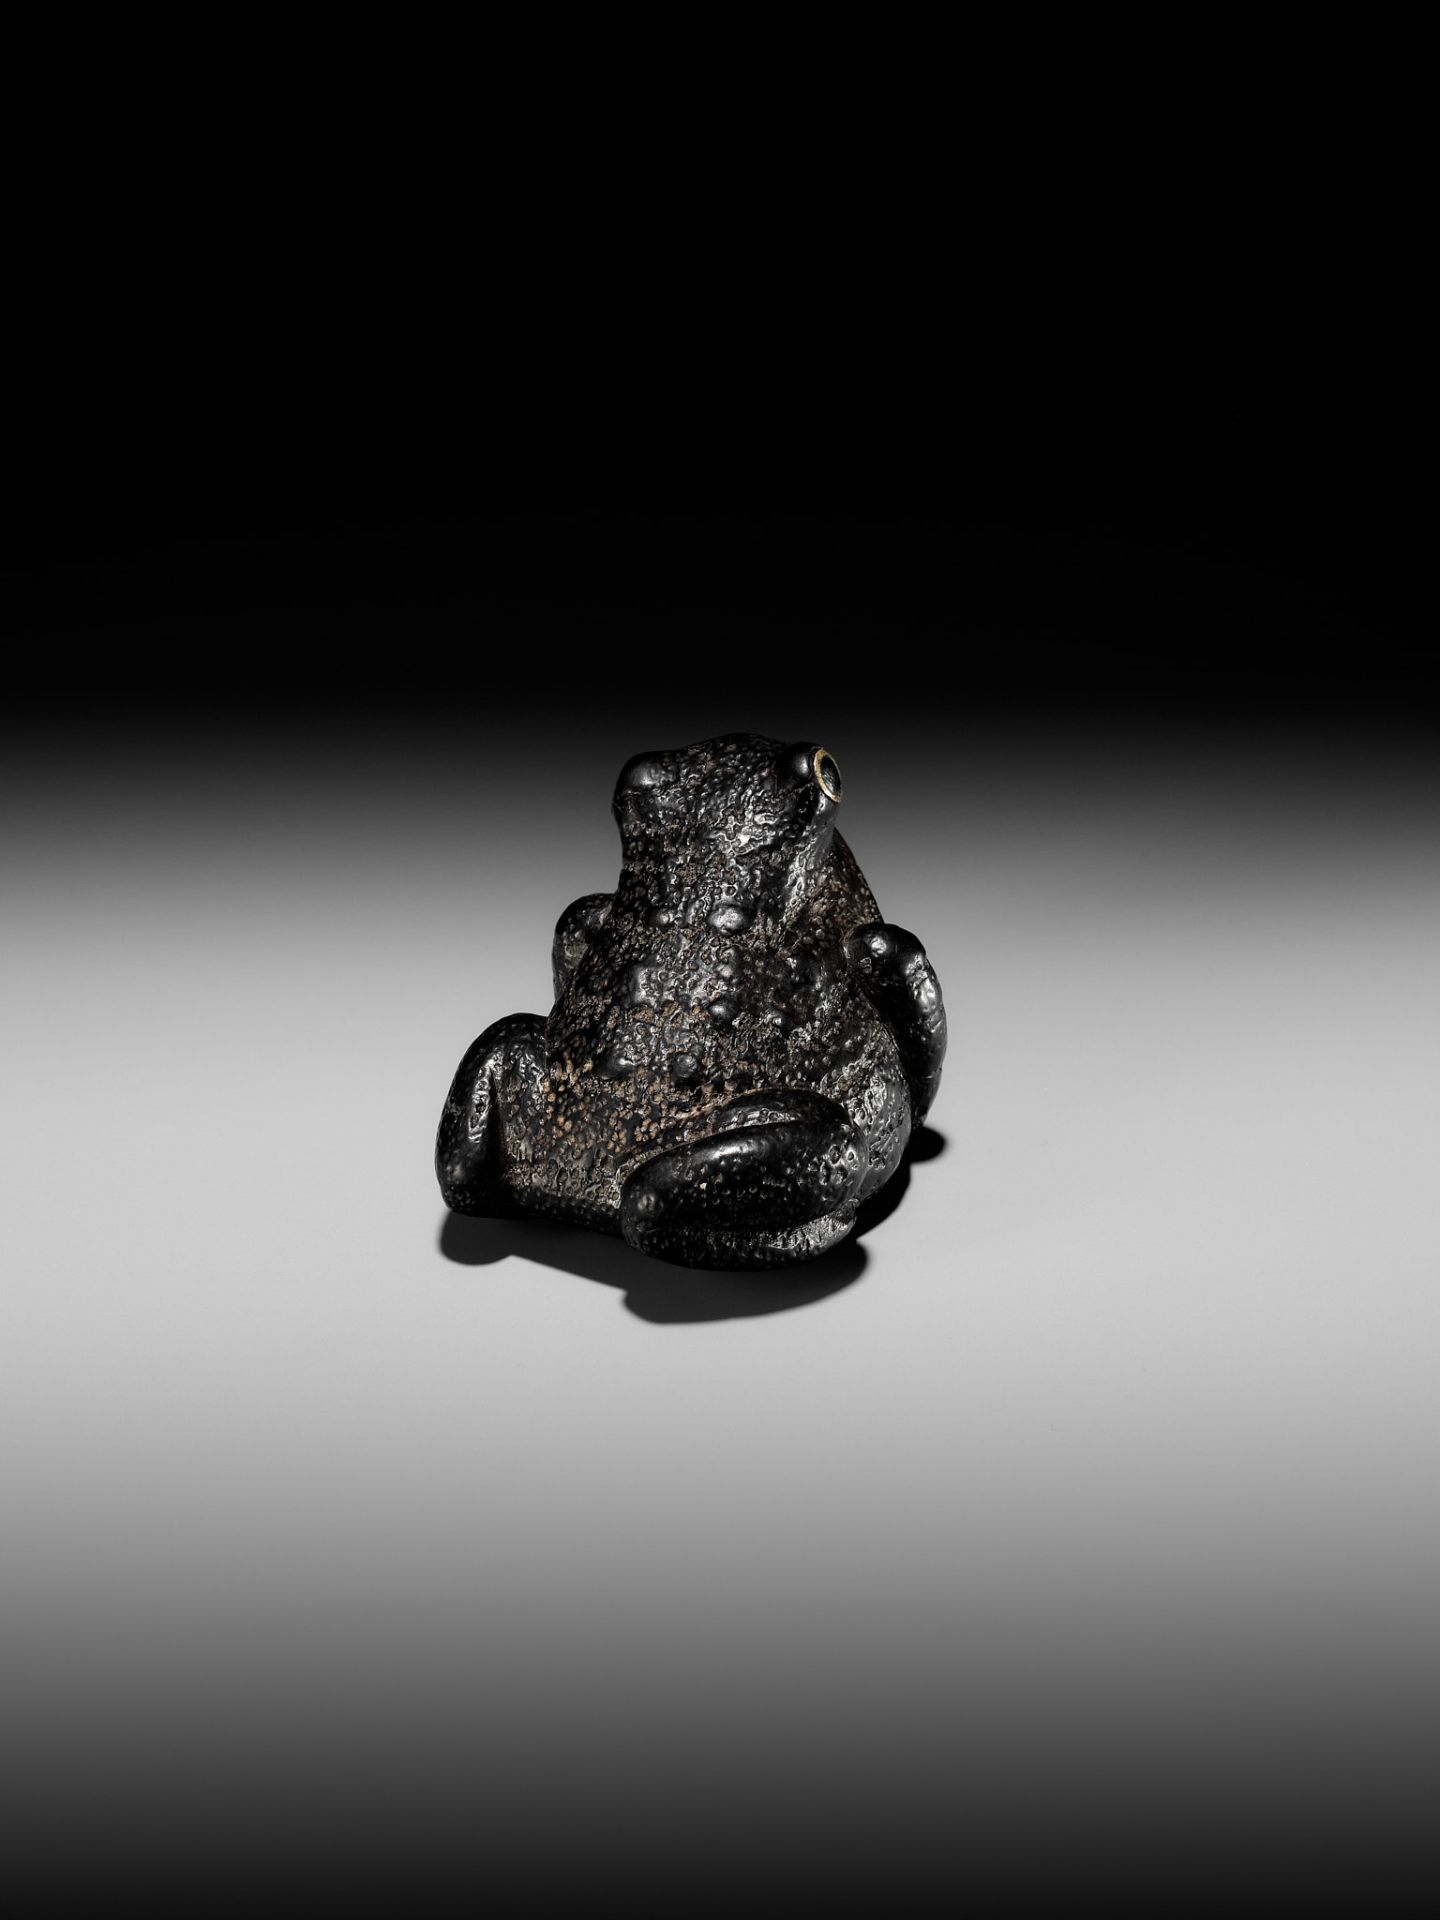 AN OLD AND RUSTIC EBONY WOOD NETSUKE OF A TOAD - Image 2 of 9